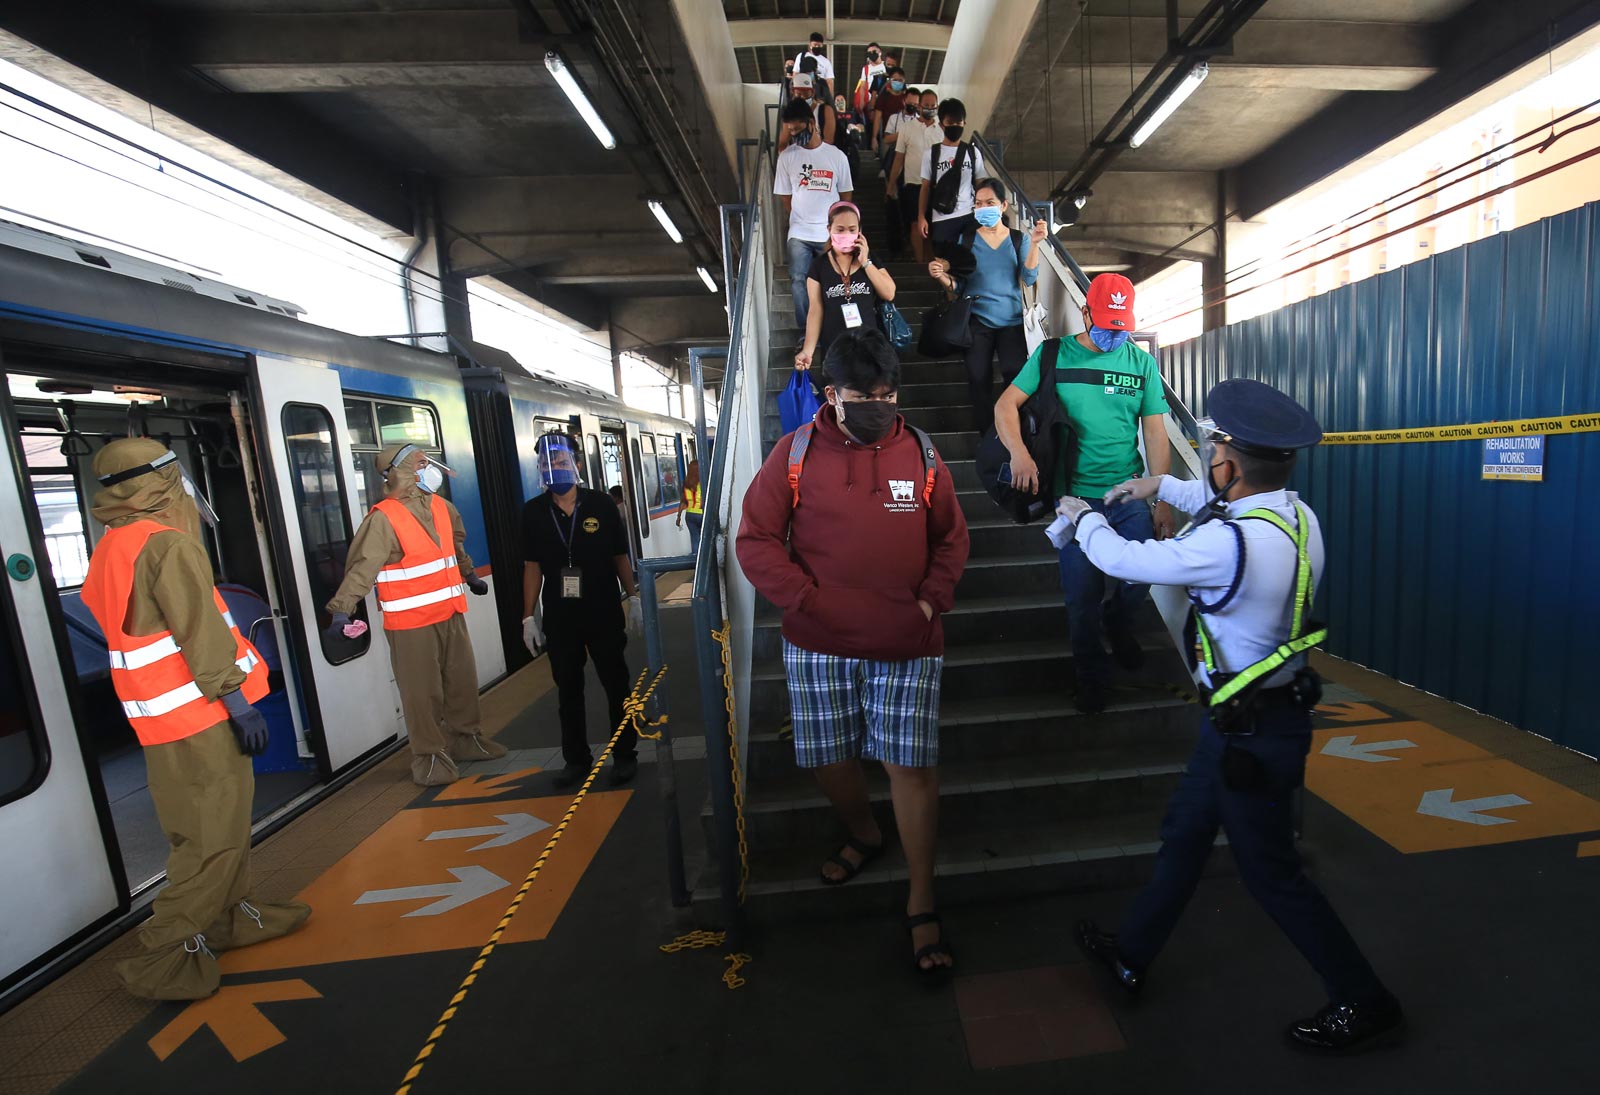 LIMITED OPERATIONS. Workers sanitize and disinfect the seats and handrails before letting commuters in the coaches at the MRT3 Taft Station in Pasay City following the resumption of operation of the train systems in Metro Manila under the general community quarantine on June 1, 2020. Photo by Ben Nabong/Rappler 